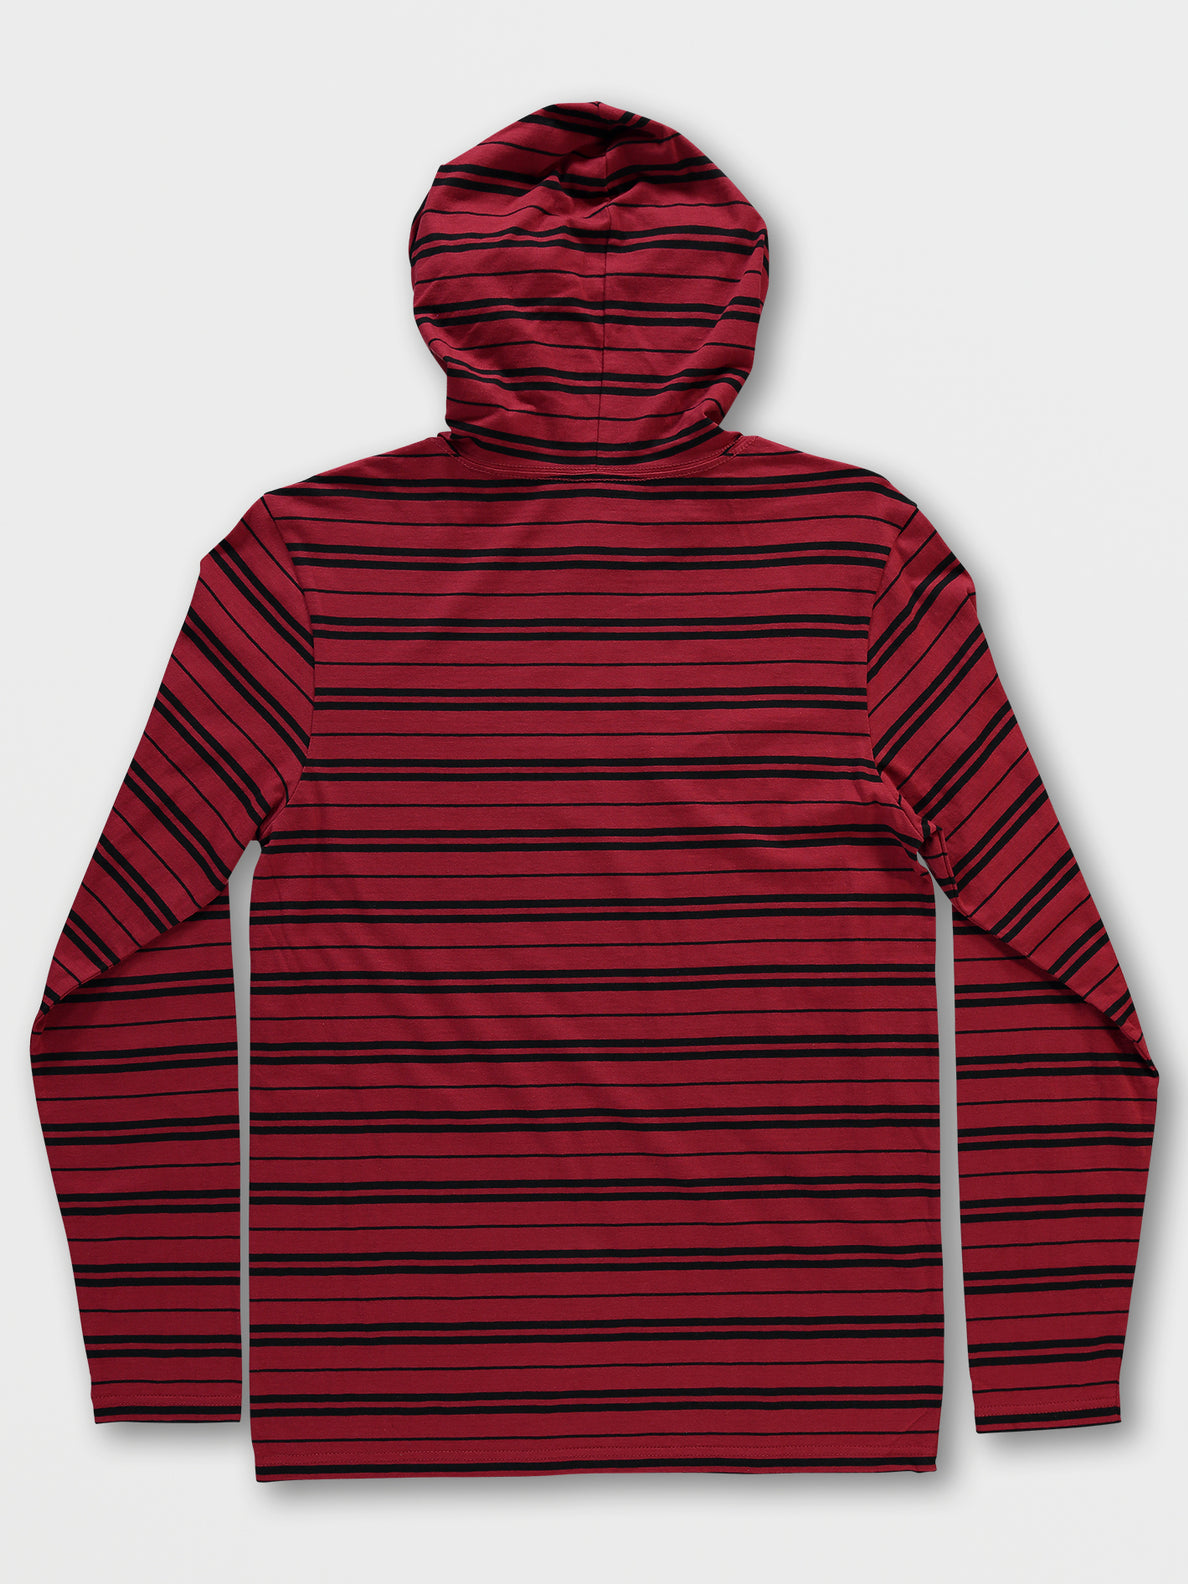 Big Boys Parables Striped Hooded Shirt - Rio Red